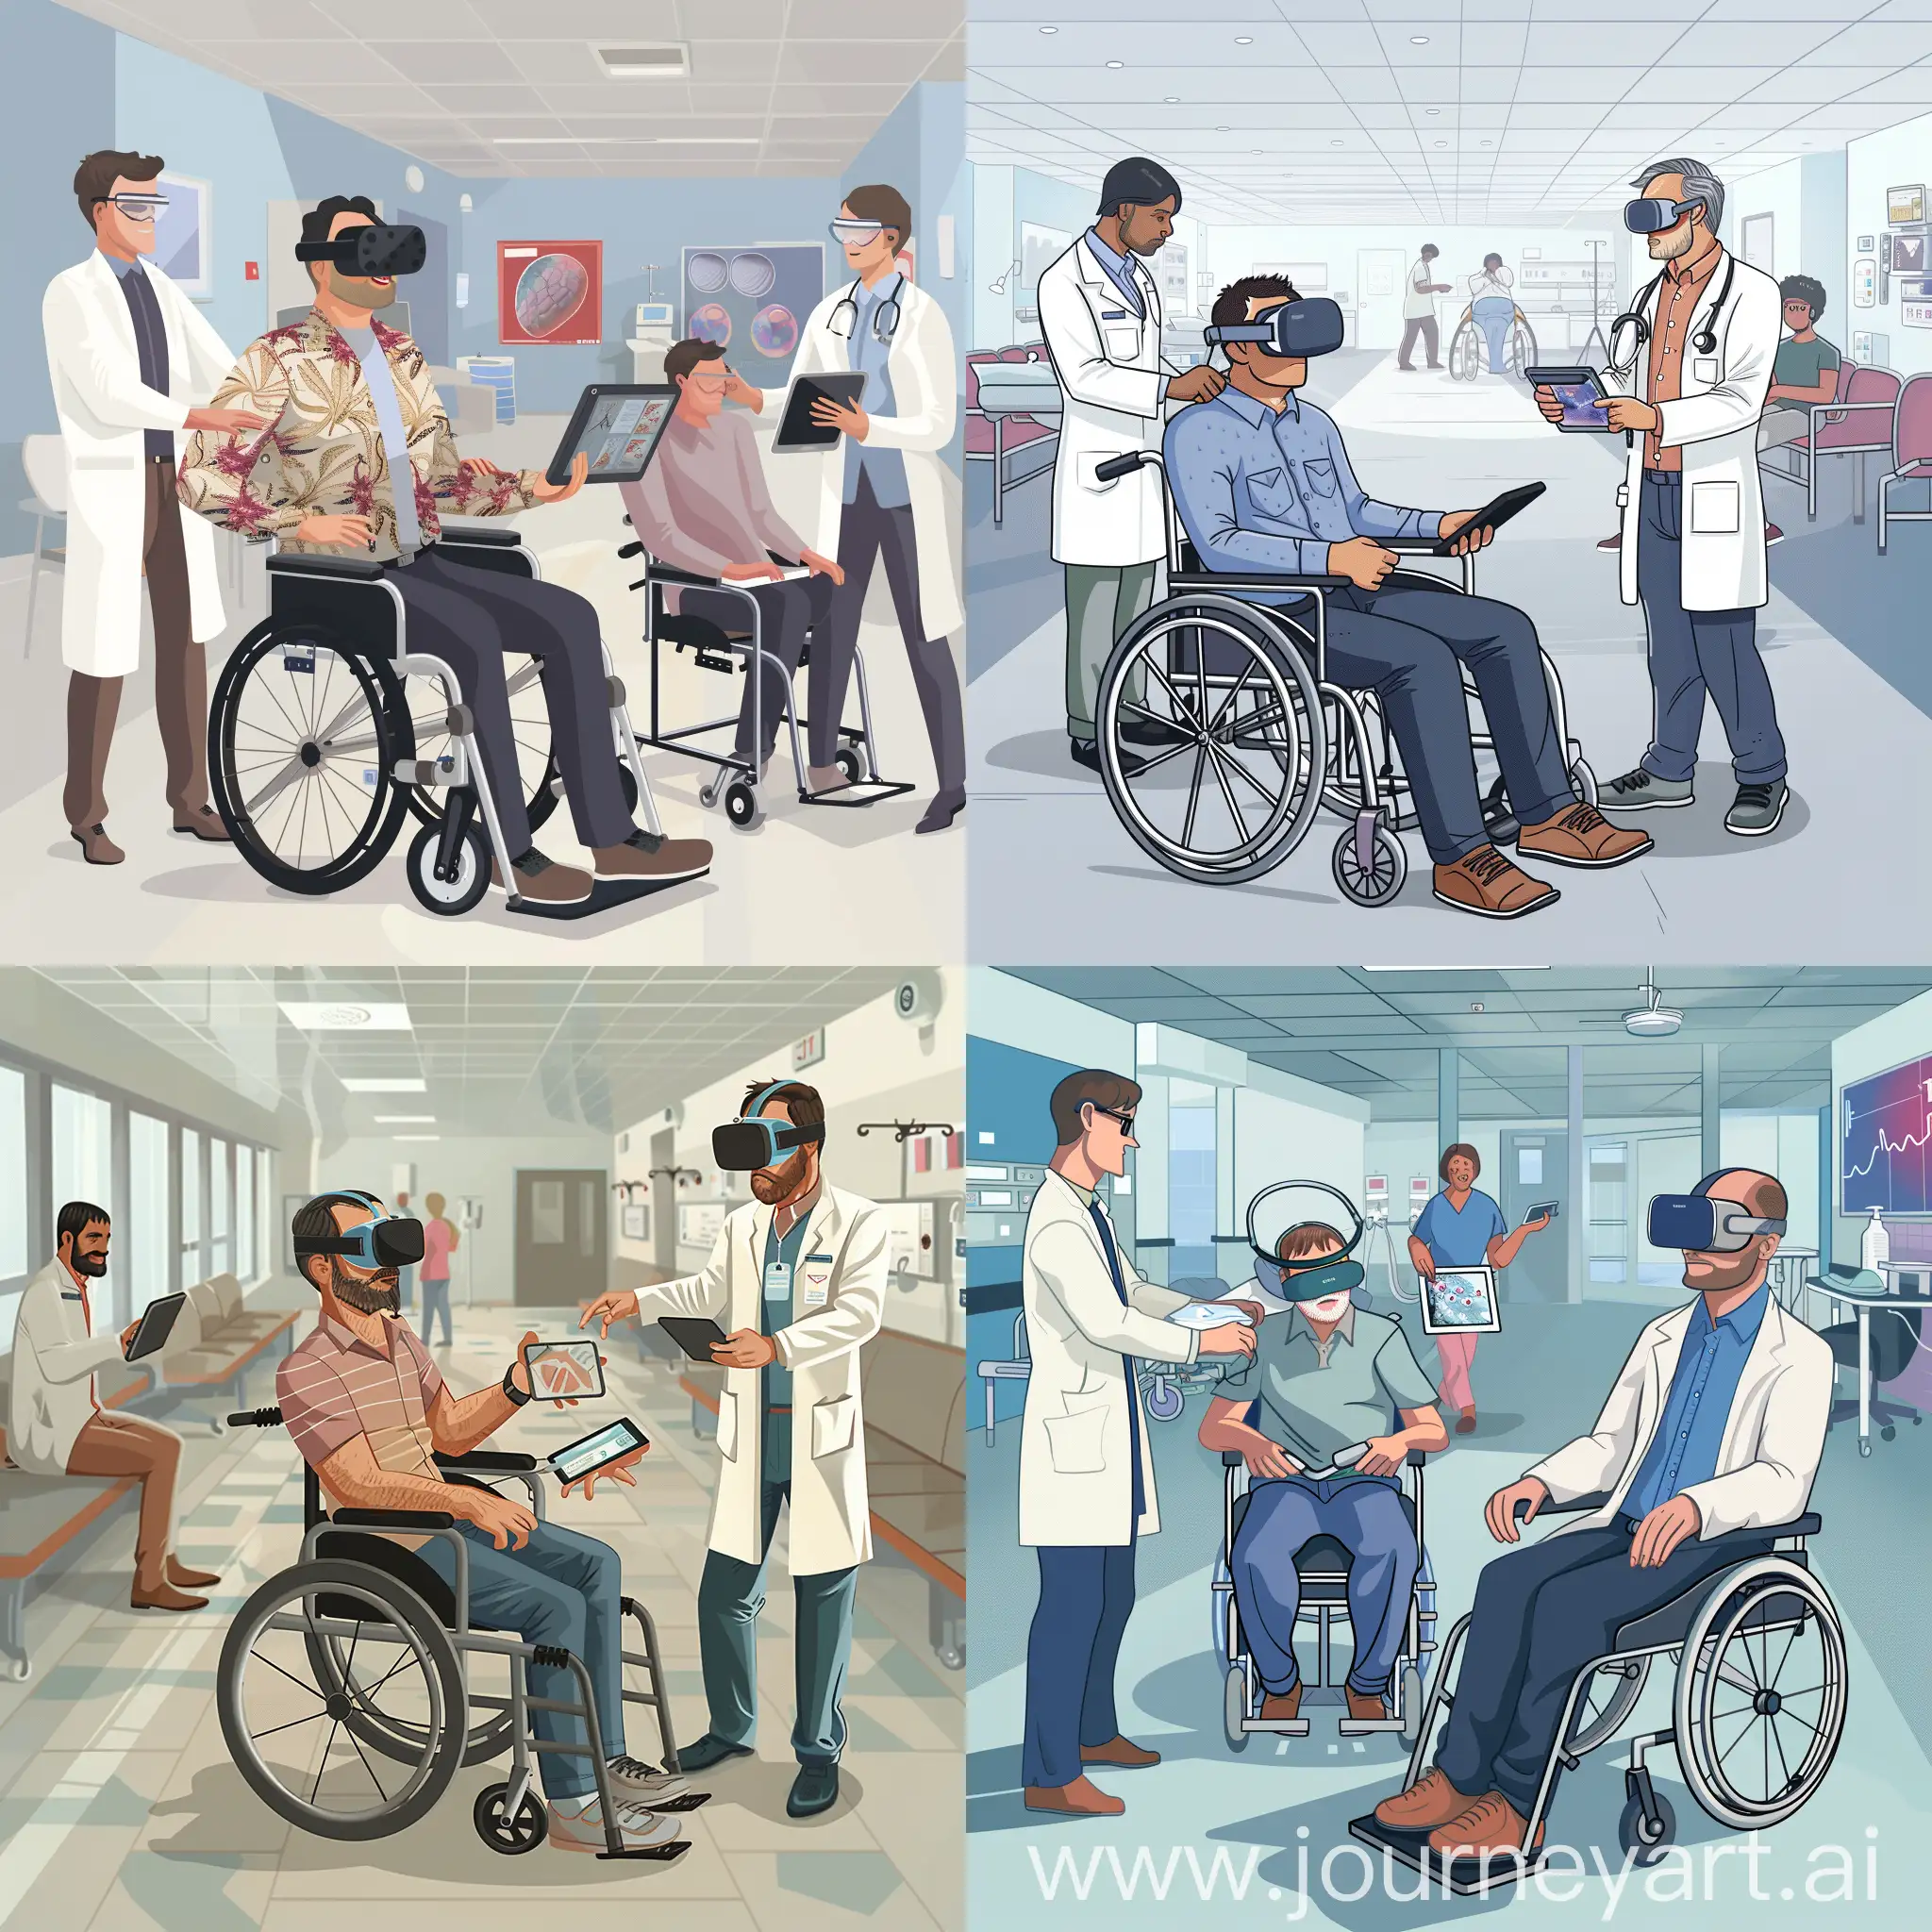 Patient-Using-VR-Headset-and-Tablet-with-Doctor-in-Hospital-Setting